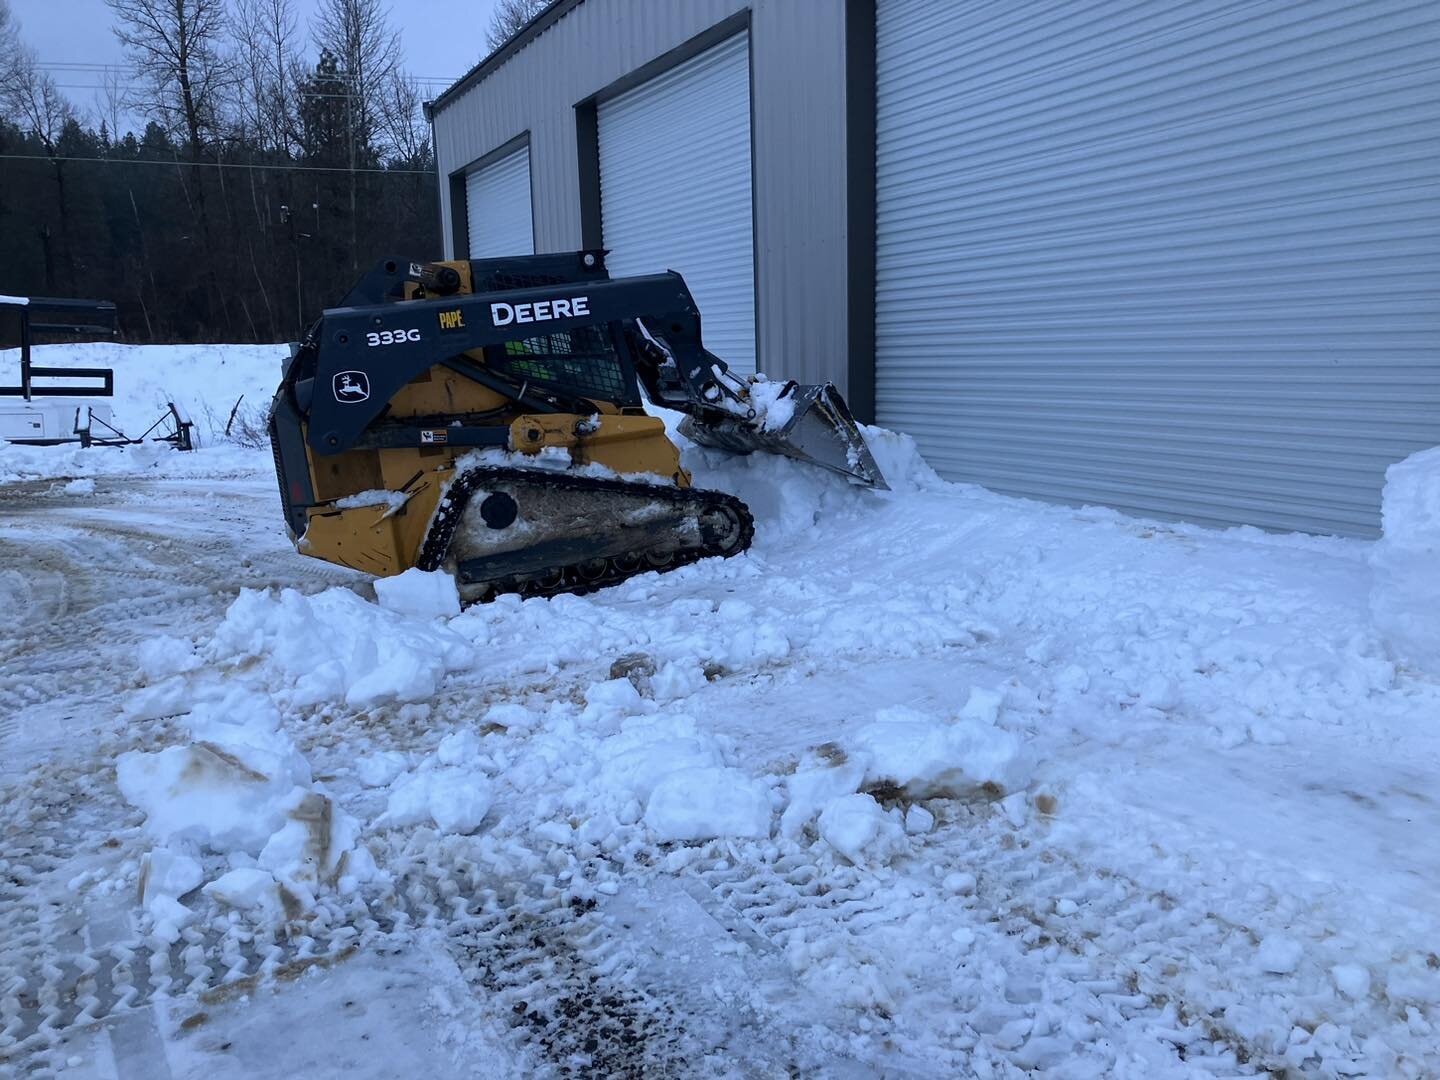 The U-11 team would like to thank BKC Contracting for bringing in equipment to move our heavy snowfall at the team shop. Our sponsors are wonderful and help the team on and off the water!